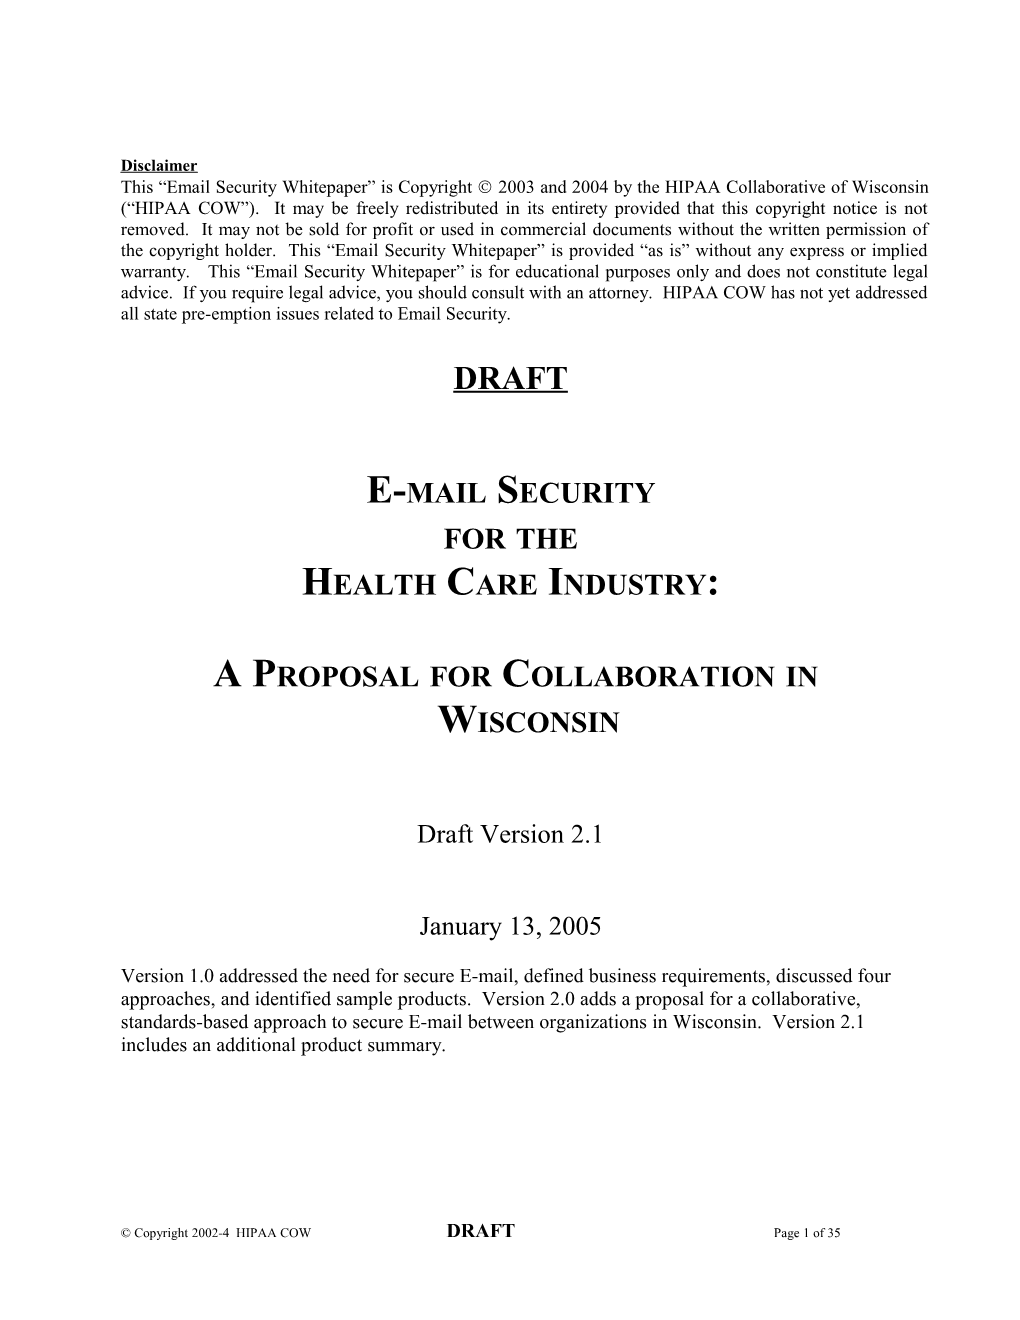 Proposal for Wisconsin Collaboration on Secure Messaging Gateways for Internet E-Mail